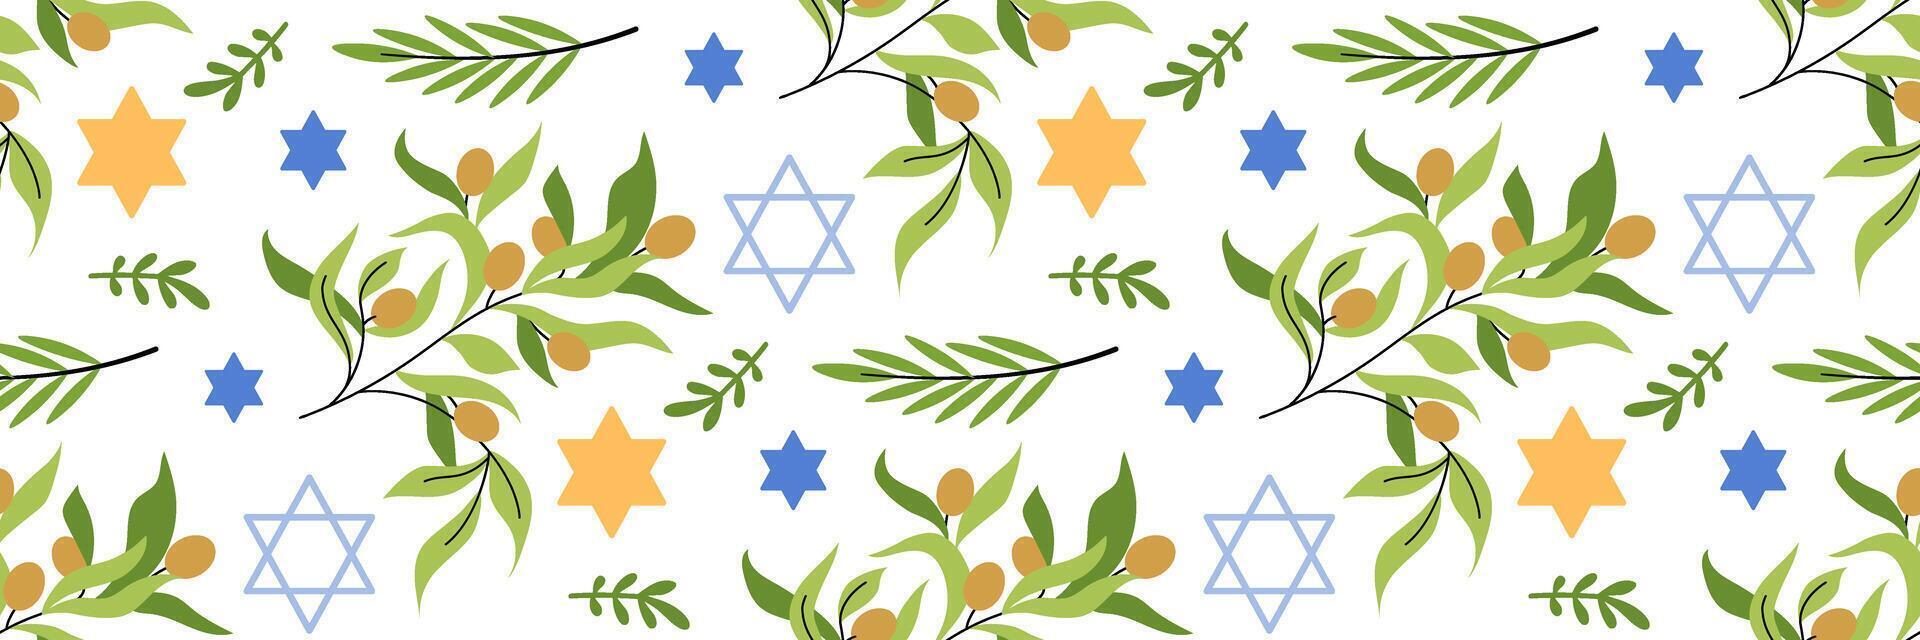 Happy Passover seamless pattern. Jewish holiday Pesach background., Star of David, olive branch. Jewish Easter celebration concept. For wallpaper, invitation. flat illustration. vector